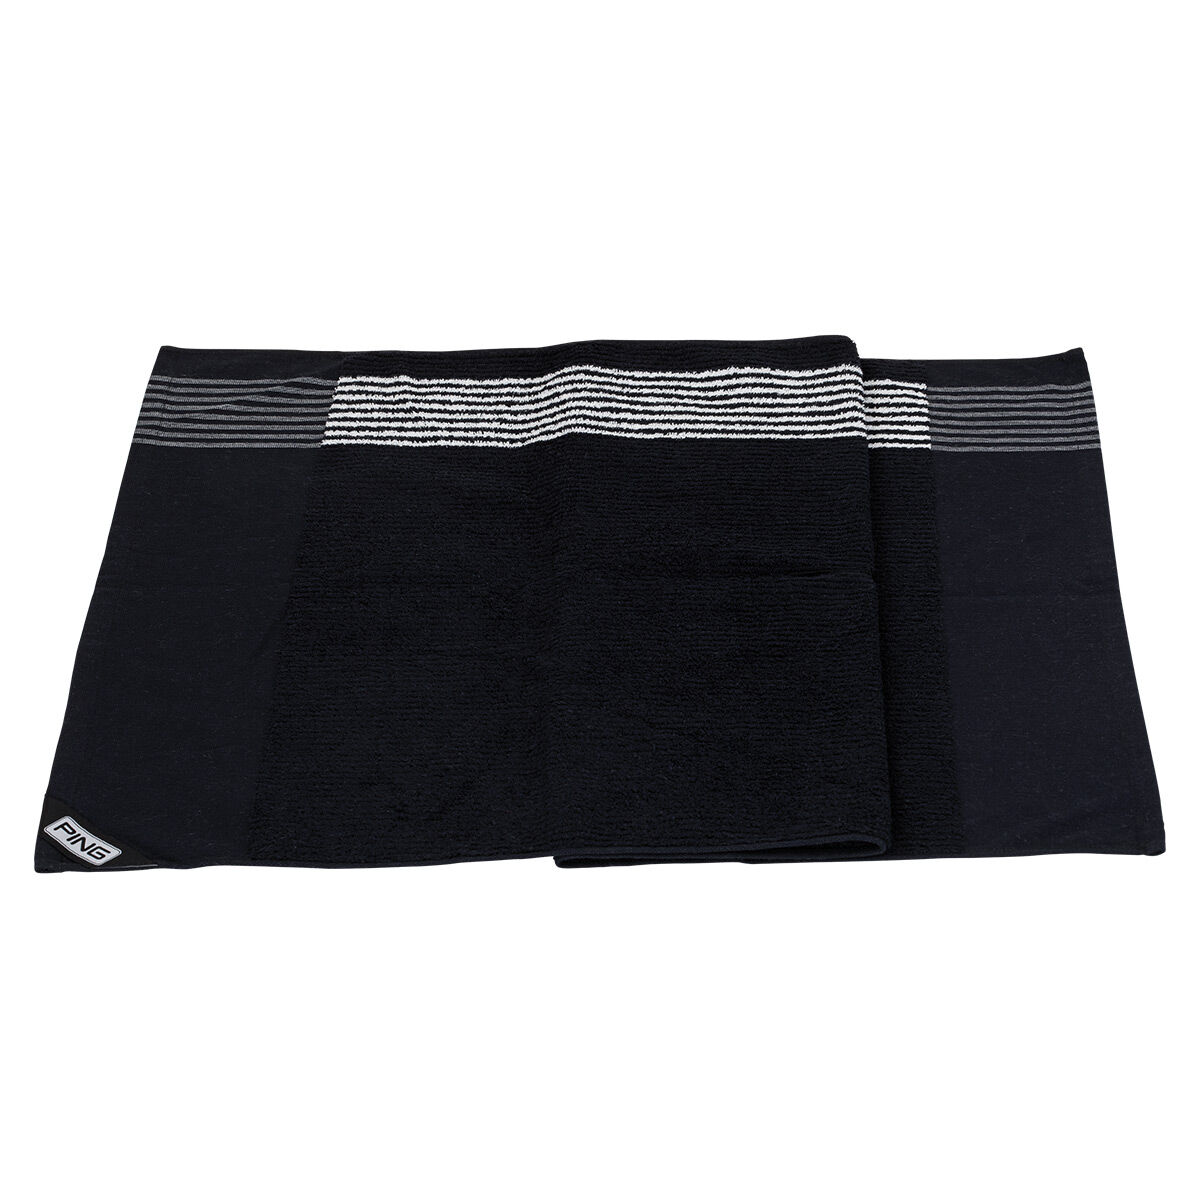 Ping Black Colour Block 214 Players Golf Towel| American Golf, One Size von Ping